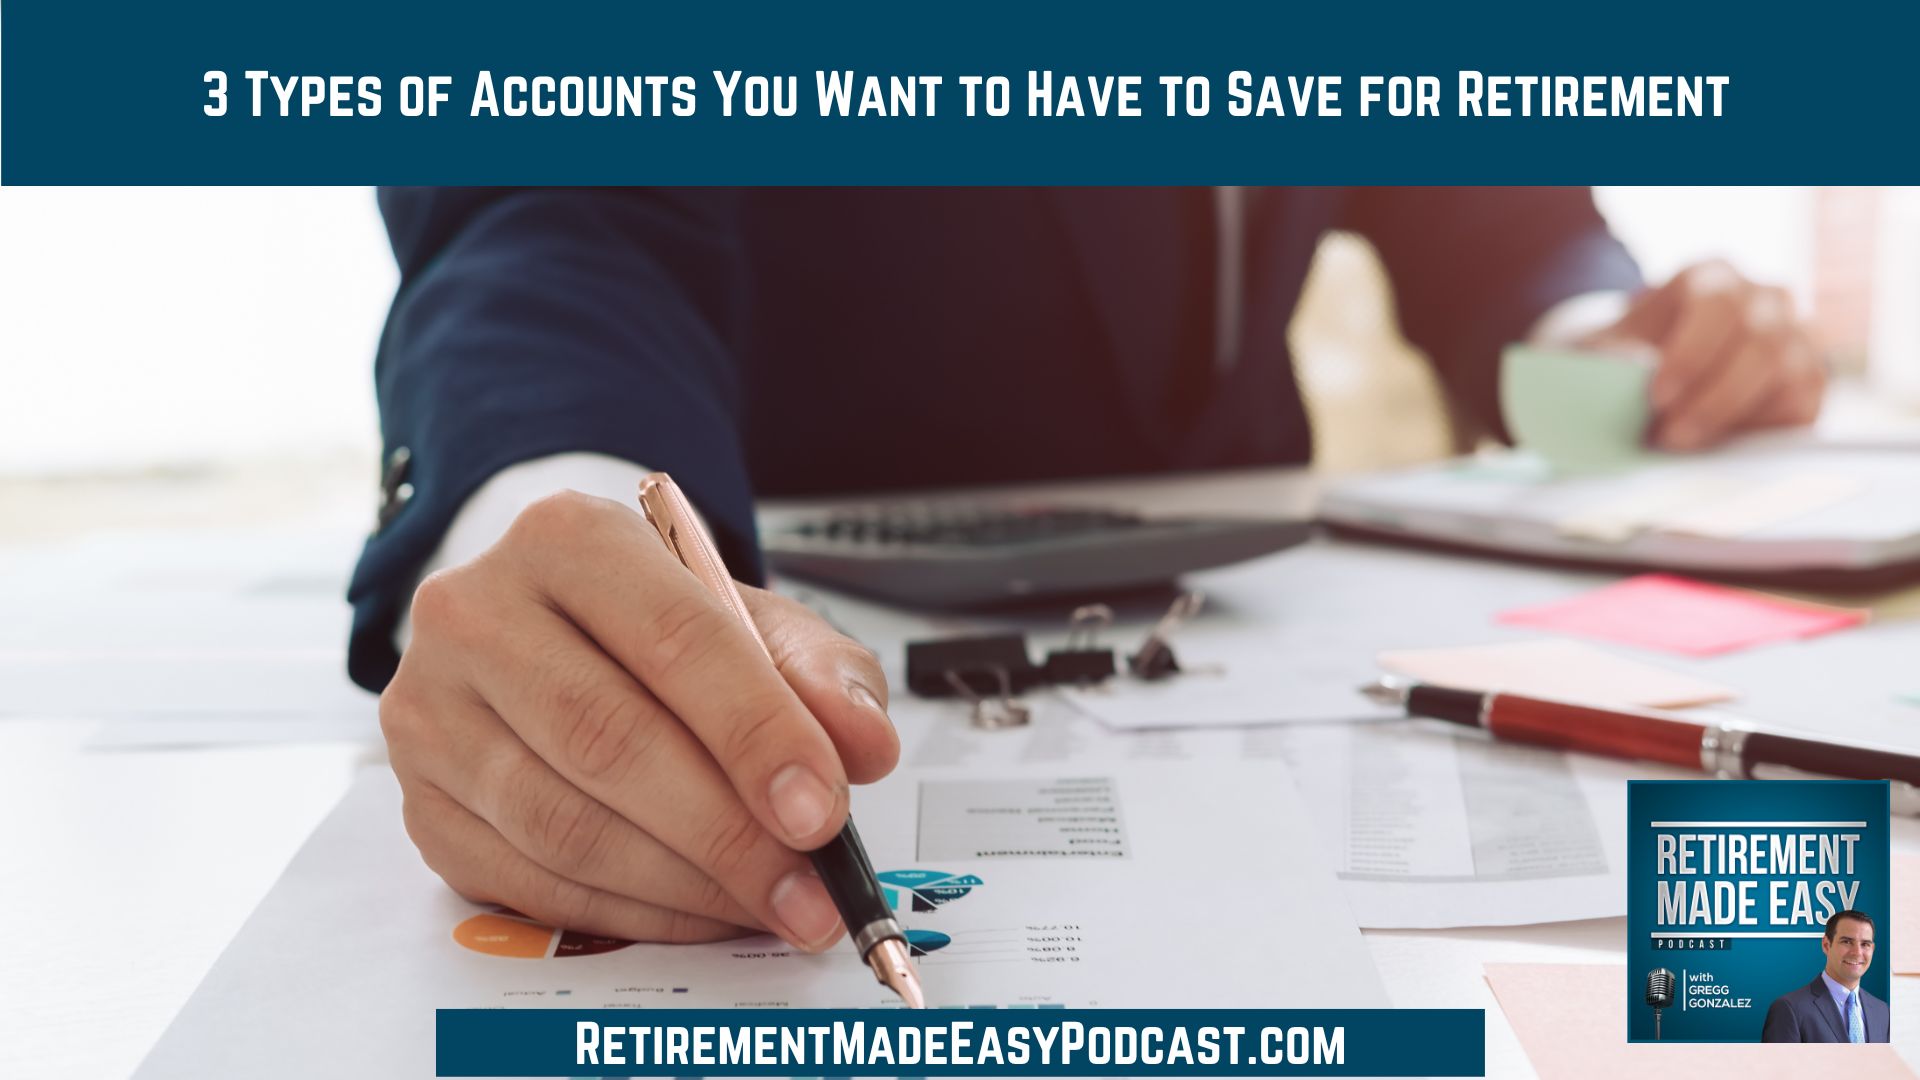 3 Types of Accounts You Want to Have to Save for Retirement